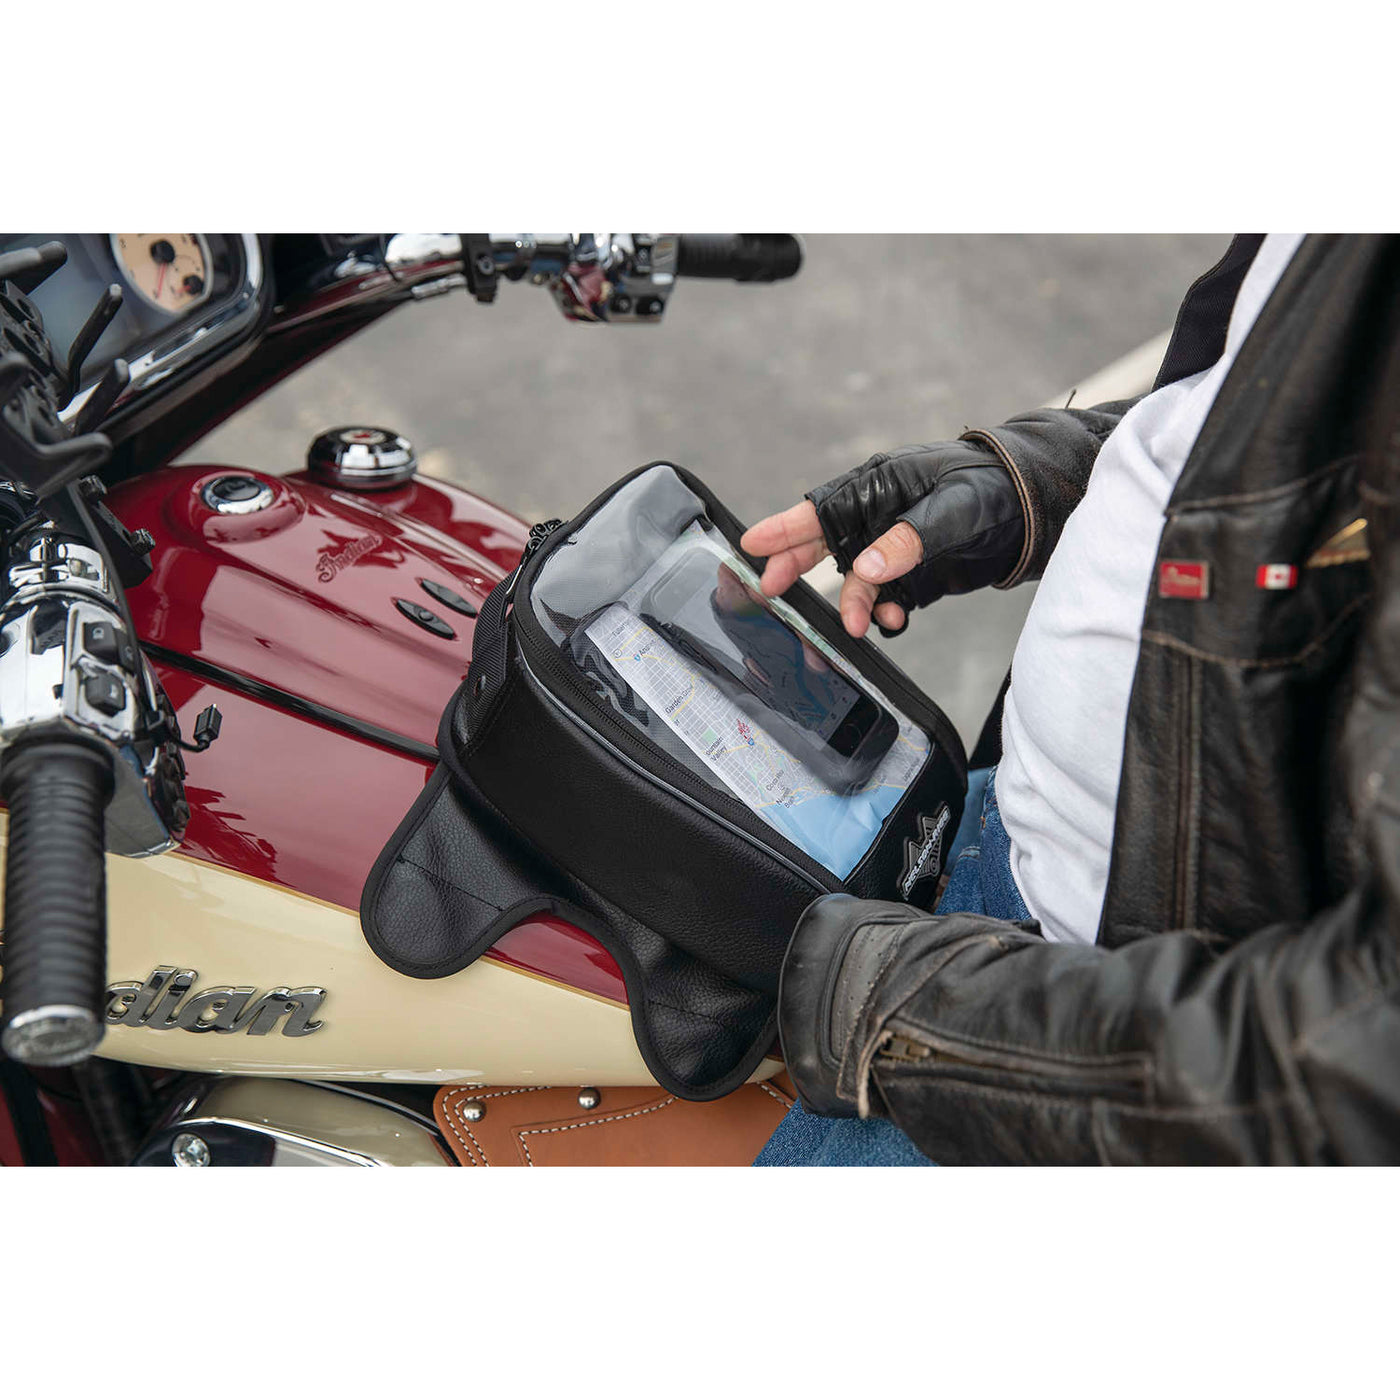 Nelson-Rigg Route 1 Journey Magnetic Tank Bag